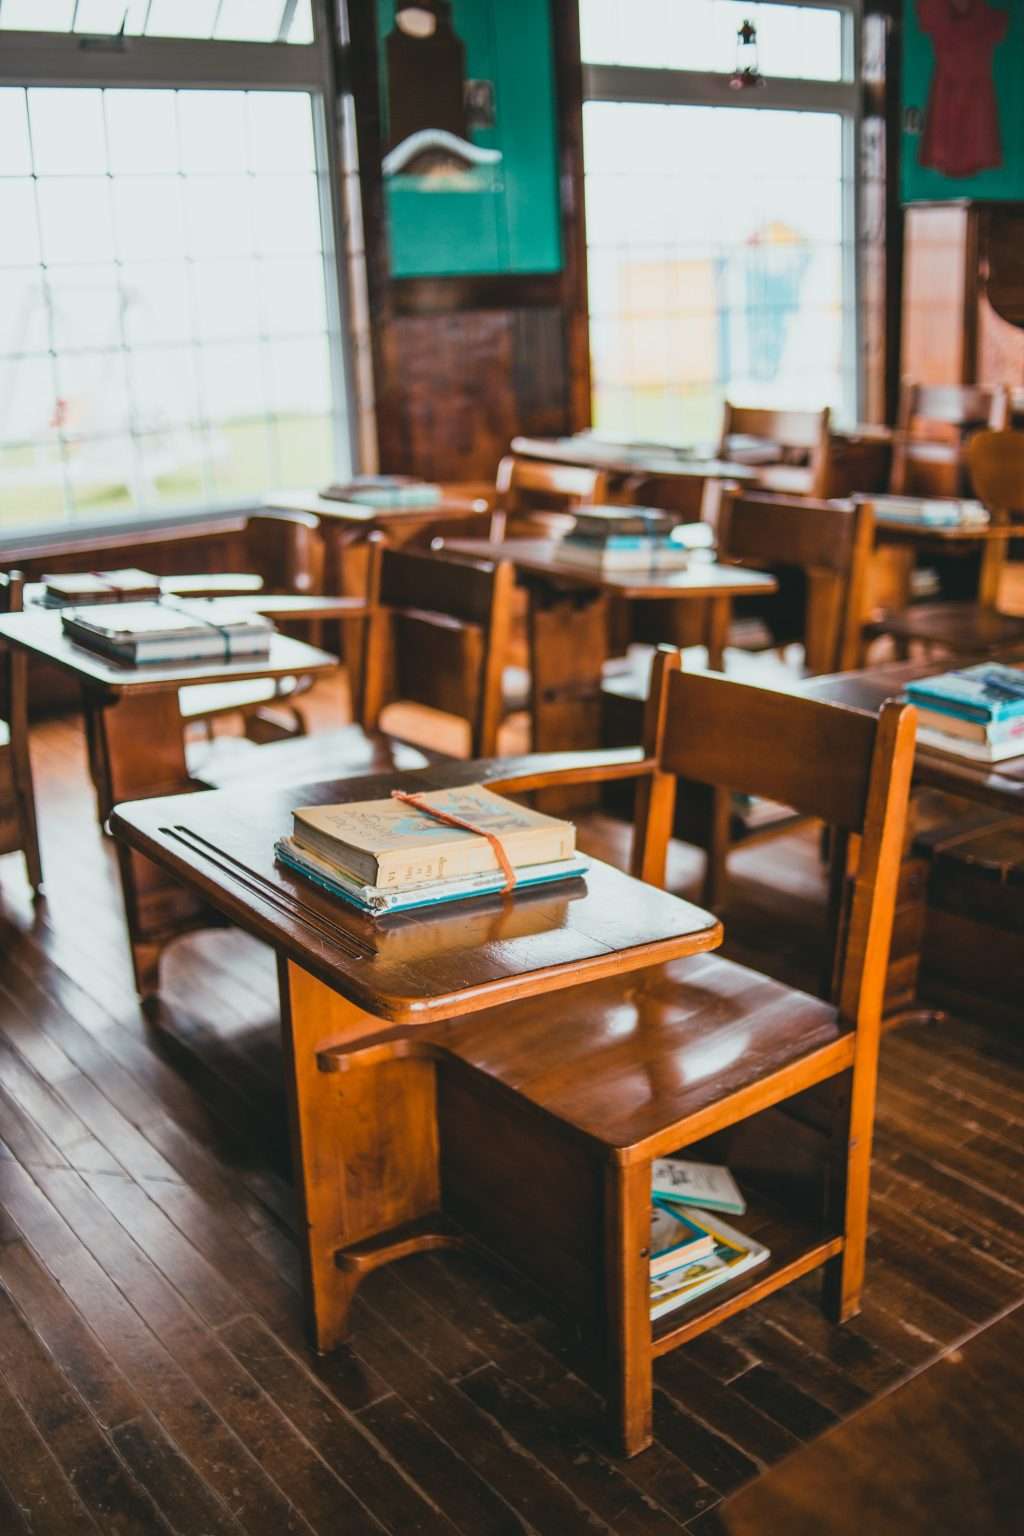 image from https://gulfbusiness.com/education-2-0-classrooms-need-a-voice-lift-to-adapt-to-the-new-normal/ this image includes a classroom. Empty and just with books on a desk